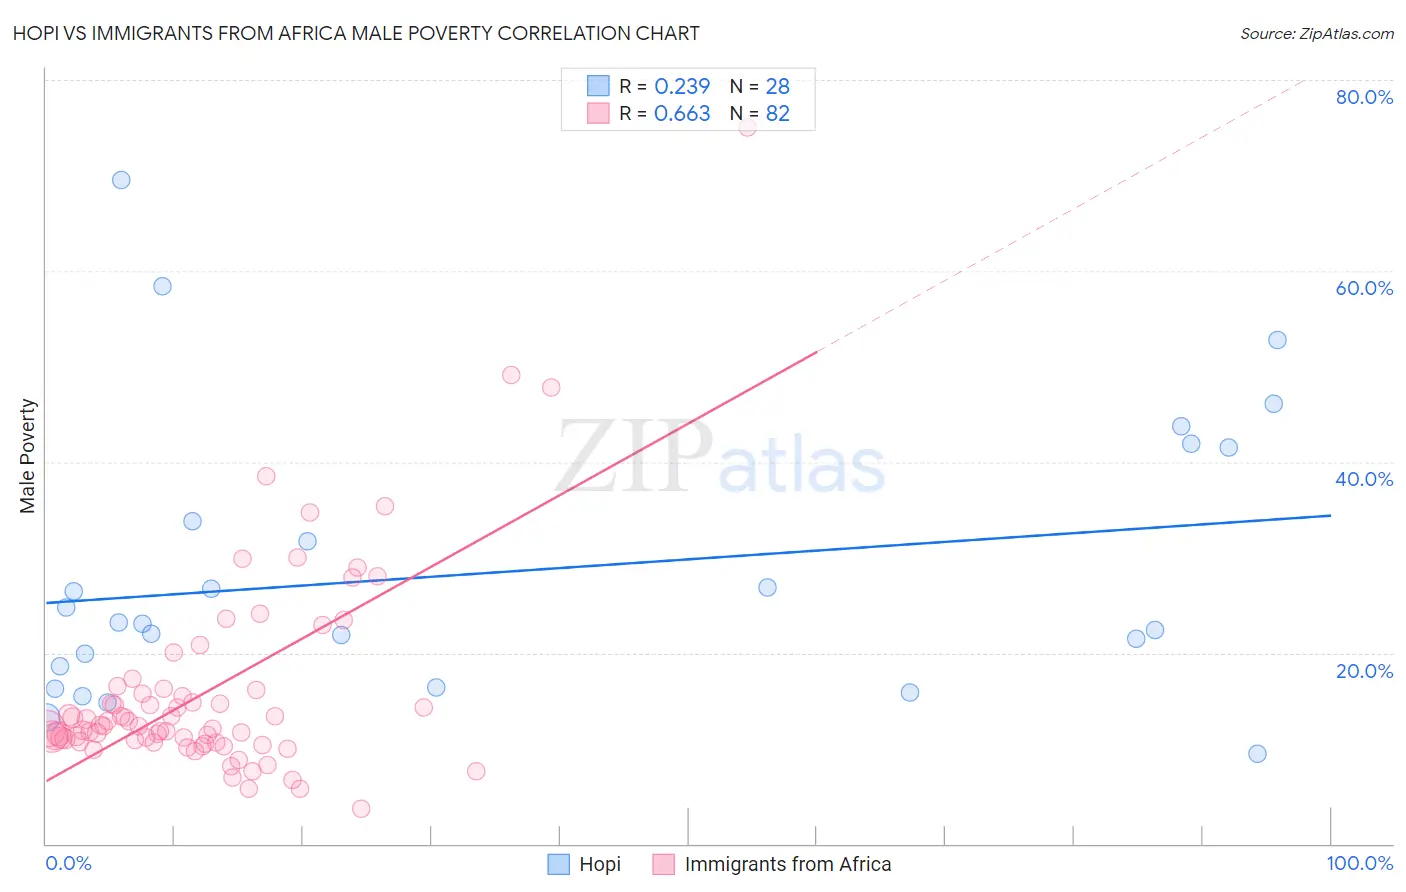 Hopi vs Immigrants from Africa Male Poverty